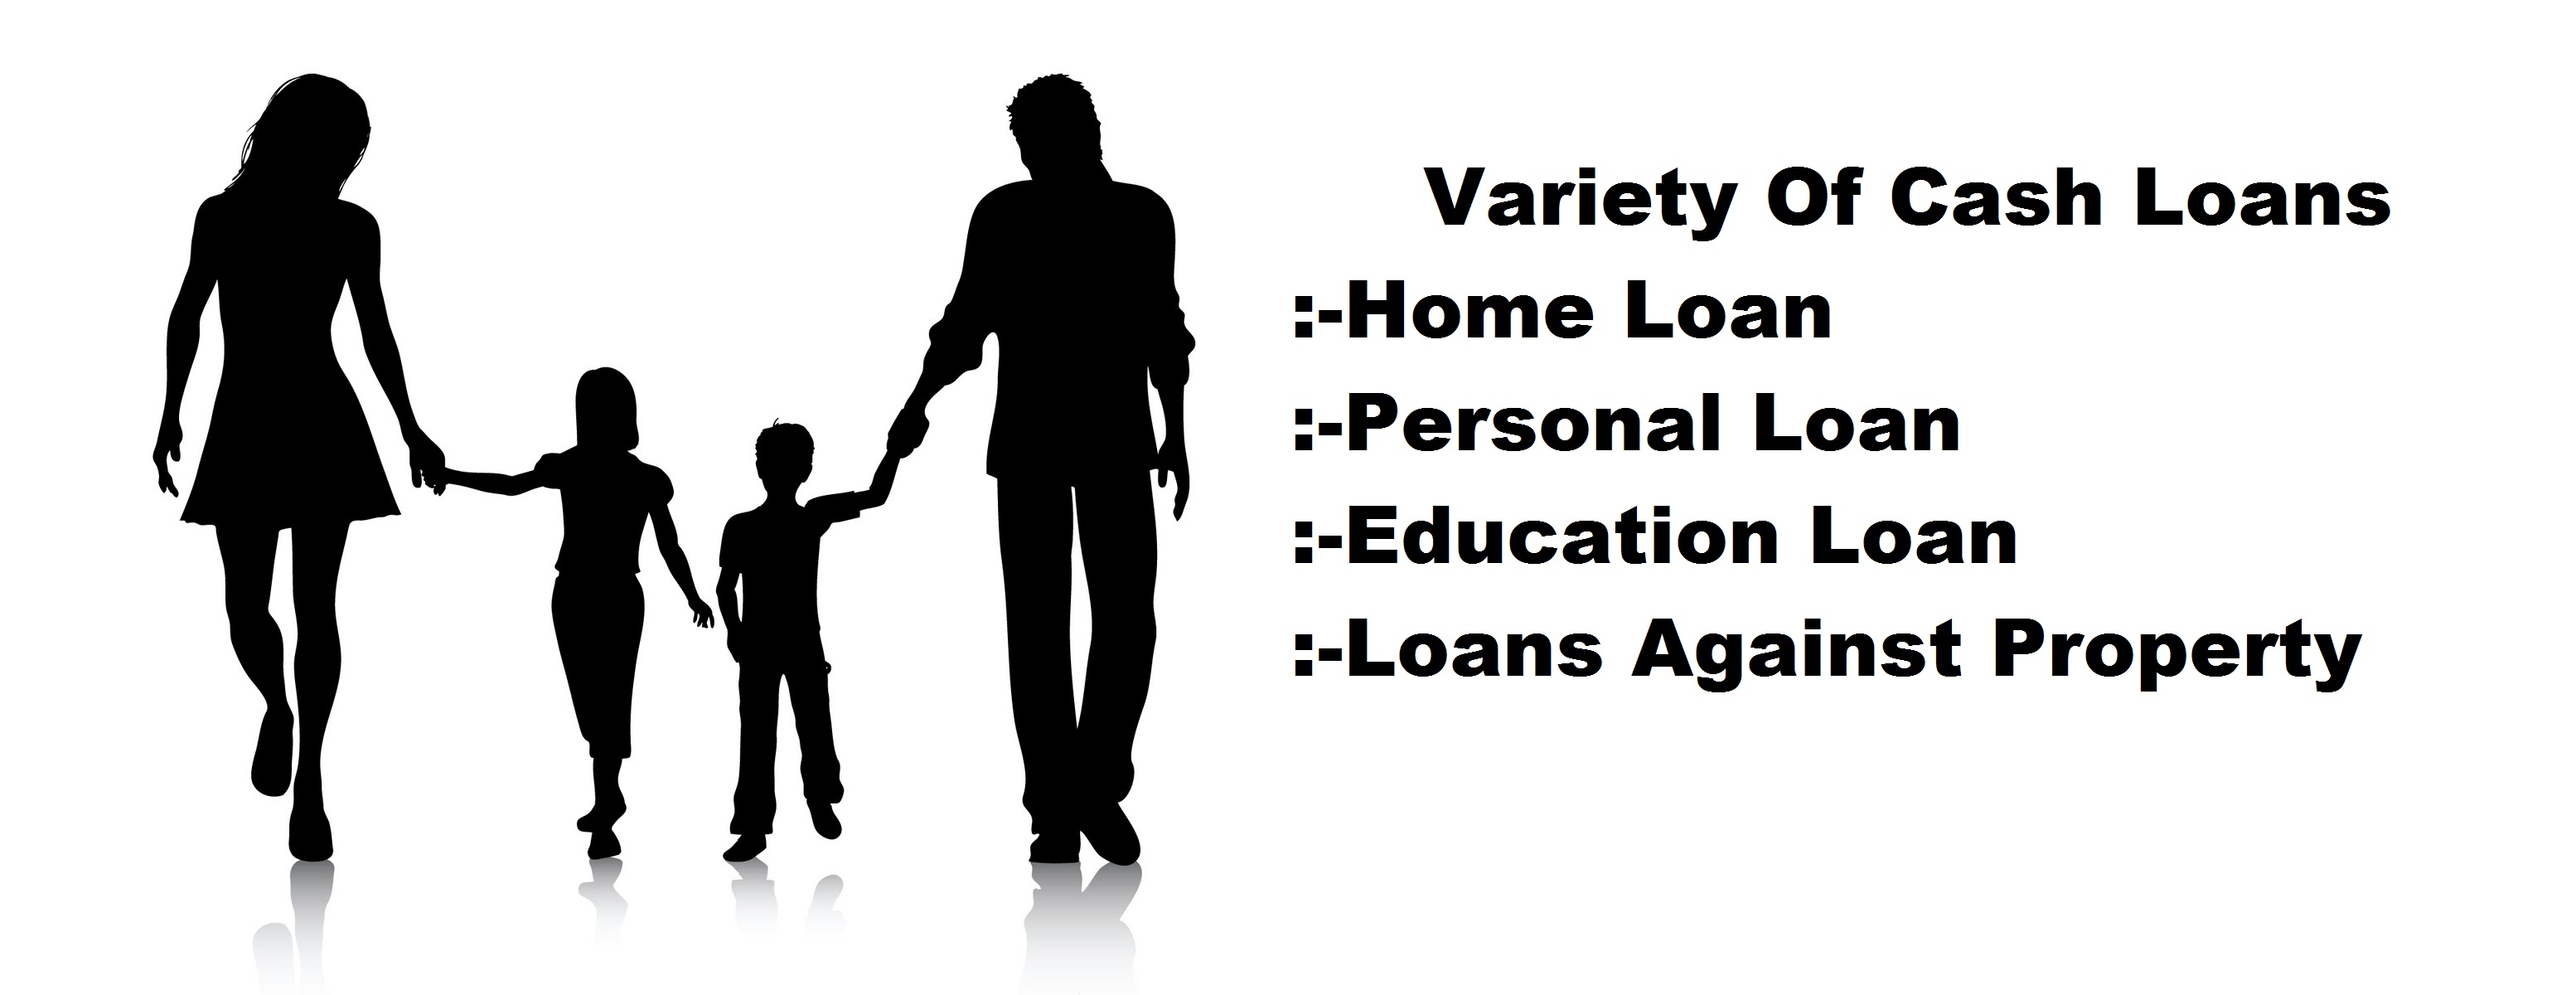 Variety Of Cash Loans